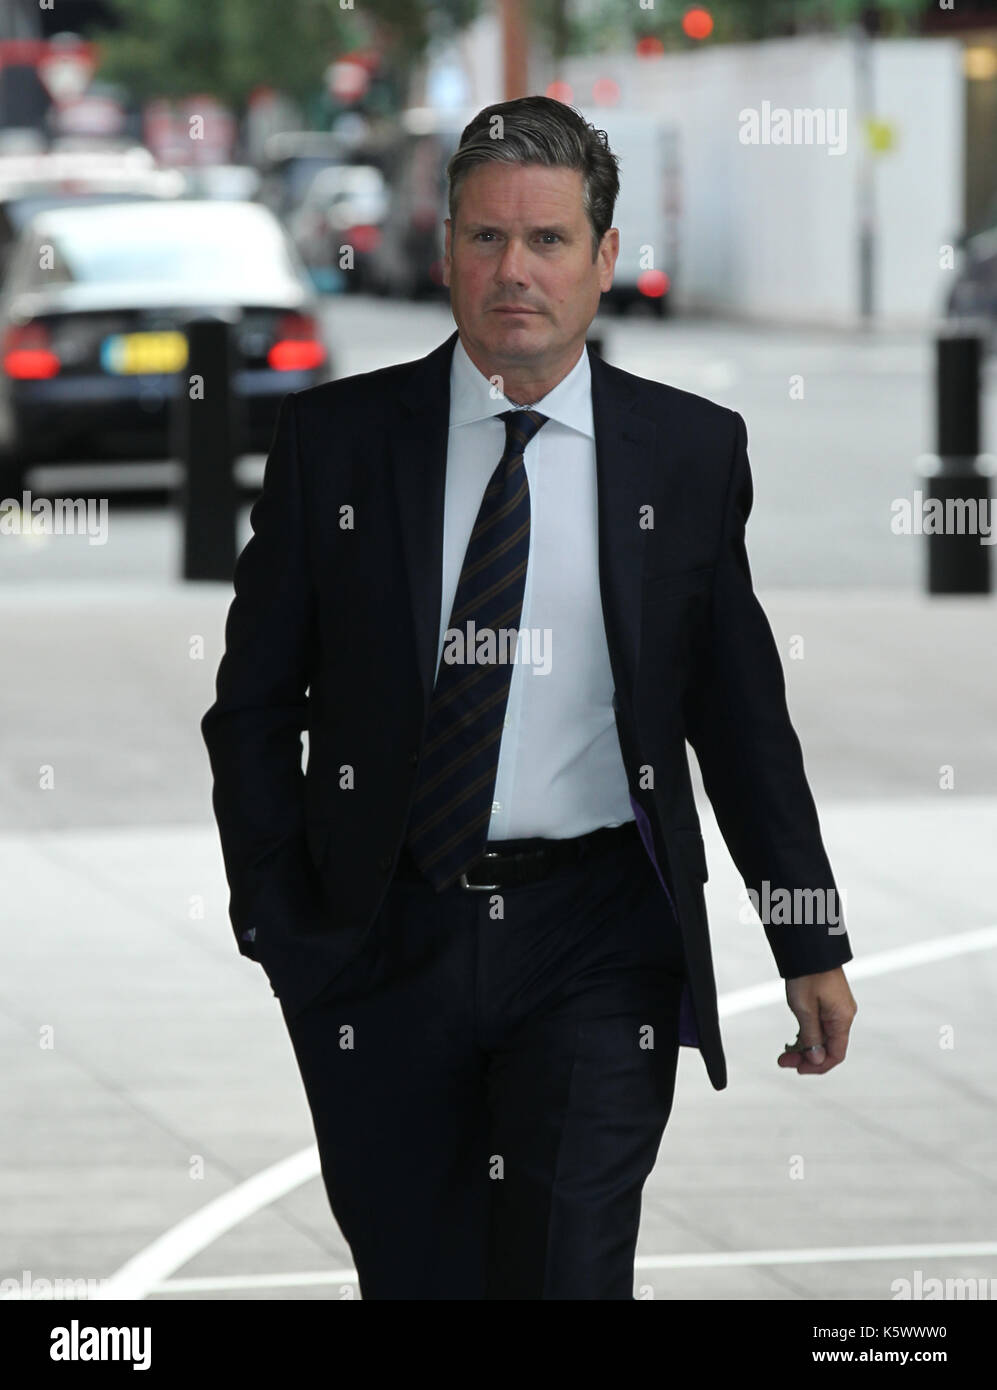 Sir Keir Starmer seen arriving to the BBC studios for the Andrew Marr Show in London on 3rd, Sep 2017 Stock Photo